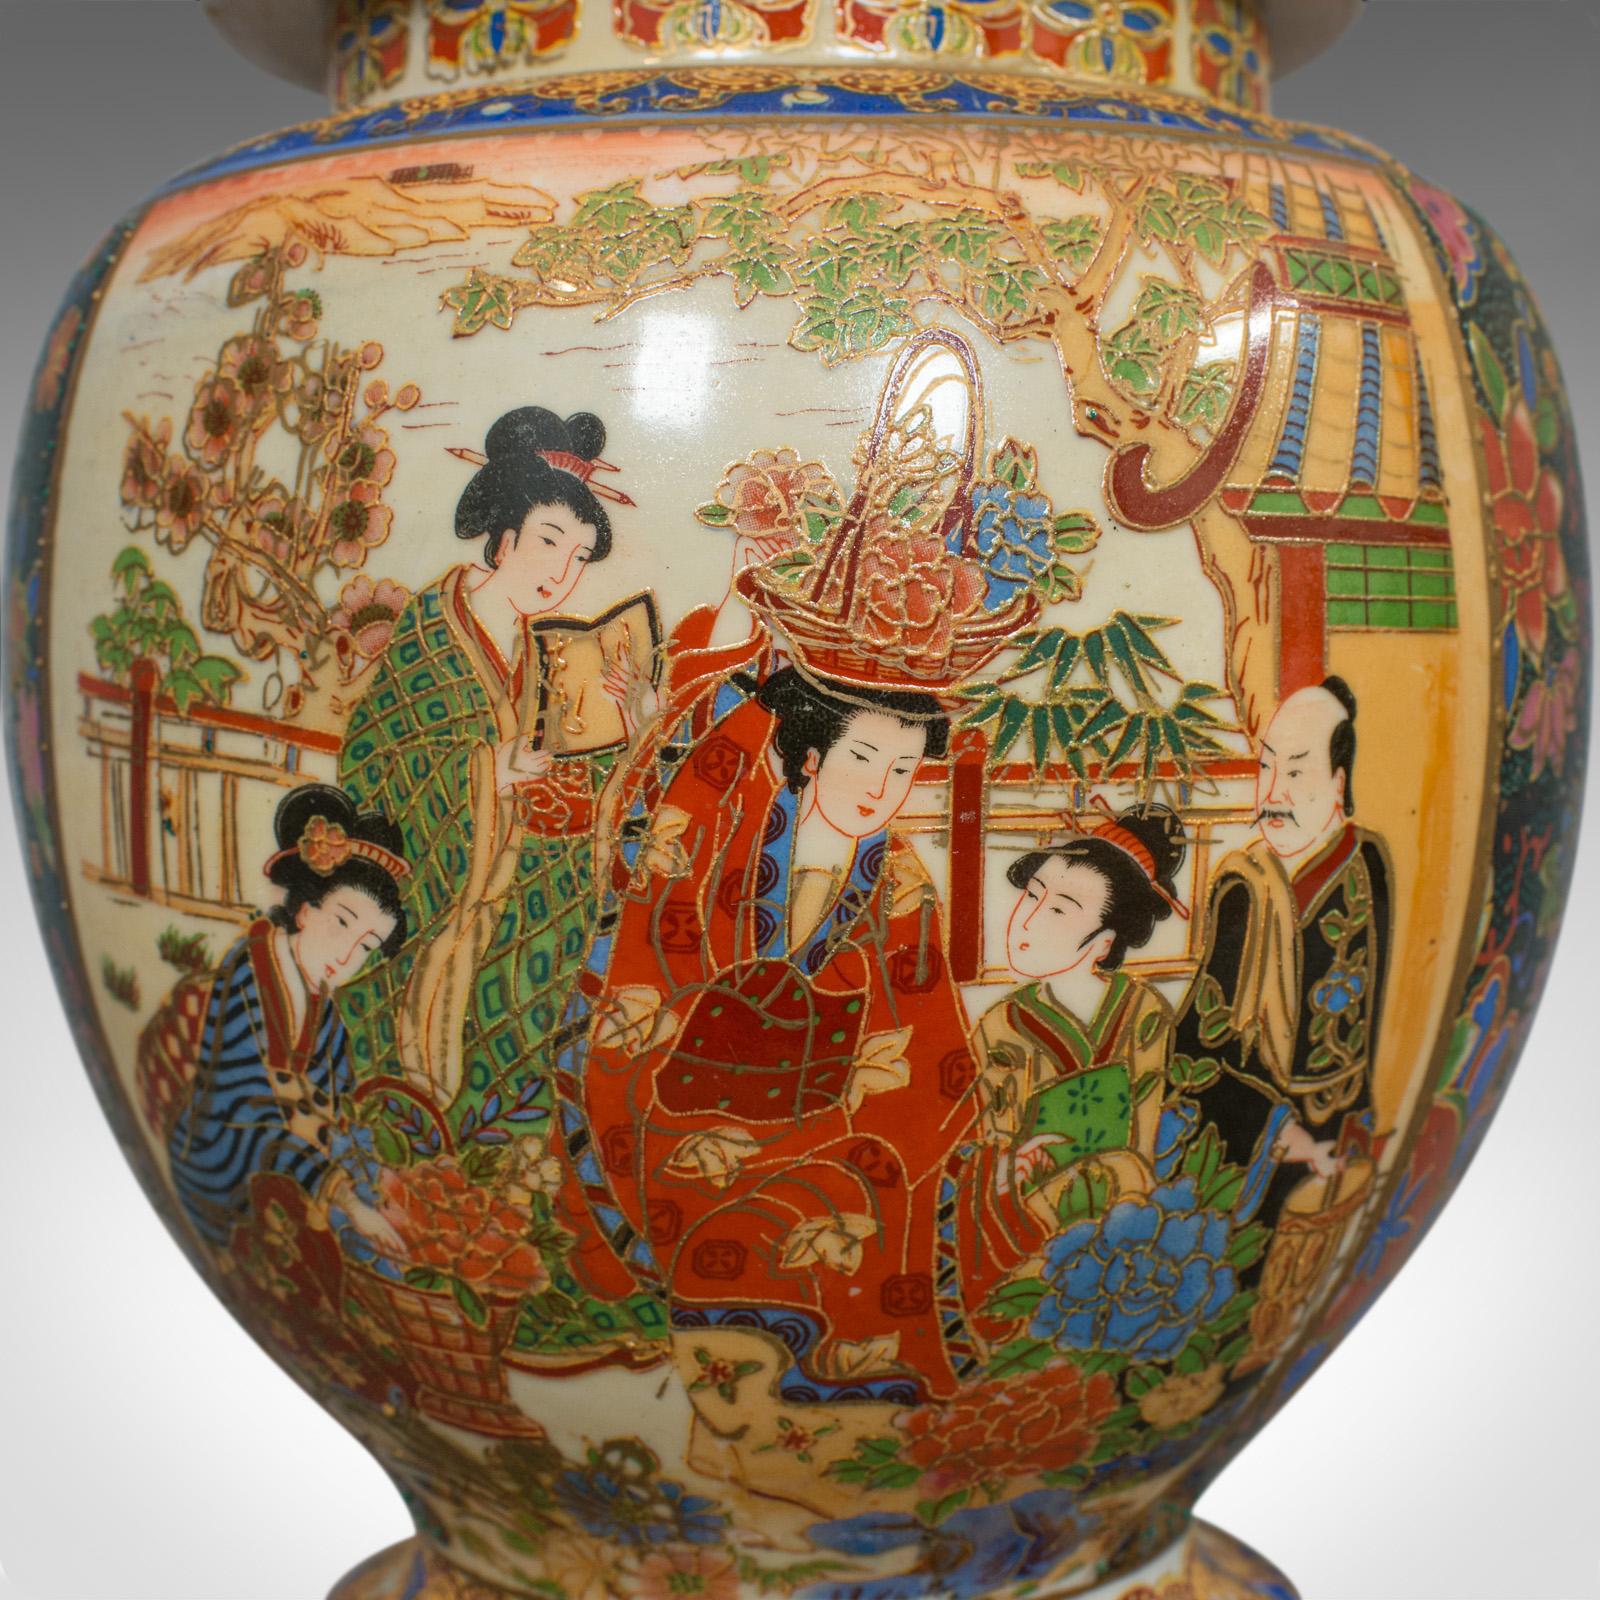 Vintage Spice Jar, Chinese, Decorative, Baluster, Vase, with Lid, 20th Century For Sale 2